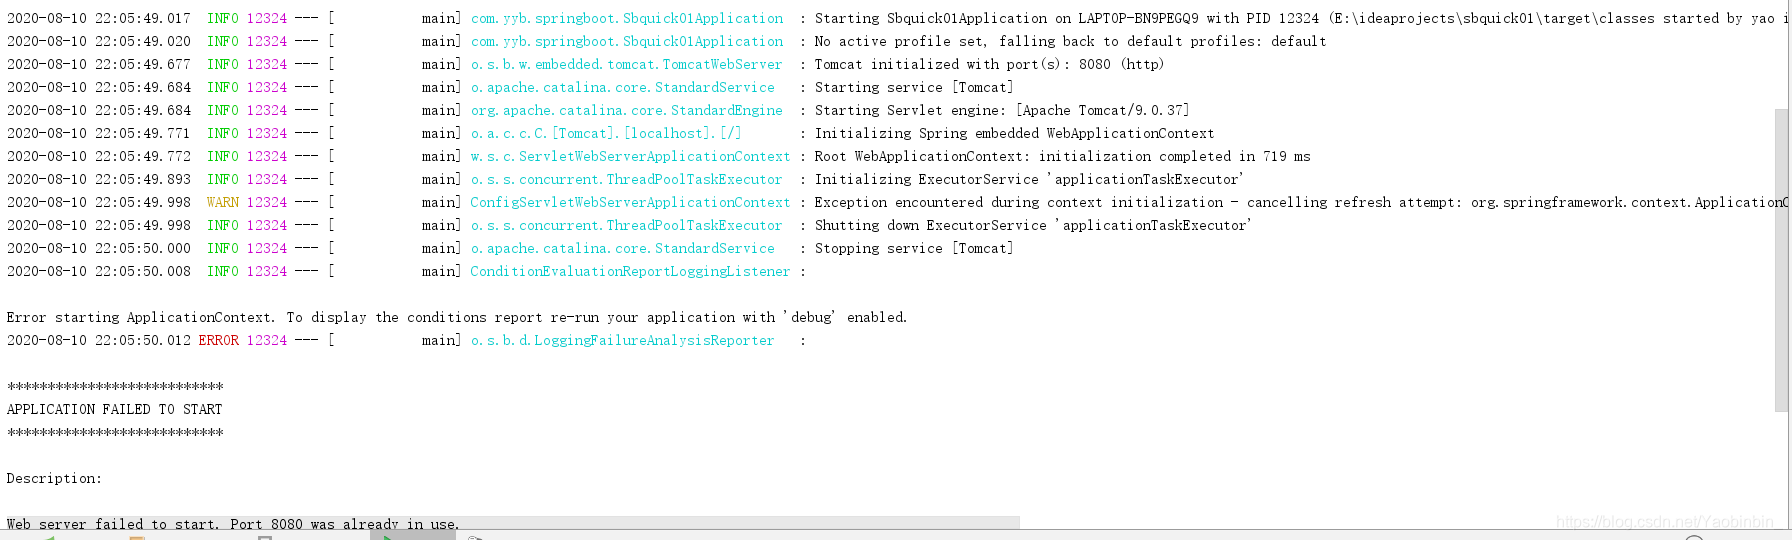 Error starting ApplicationContext. To display the conditions report re-run your application with 'debug' enabled."